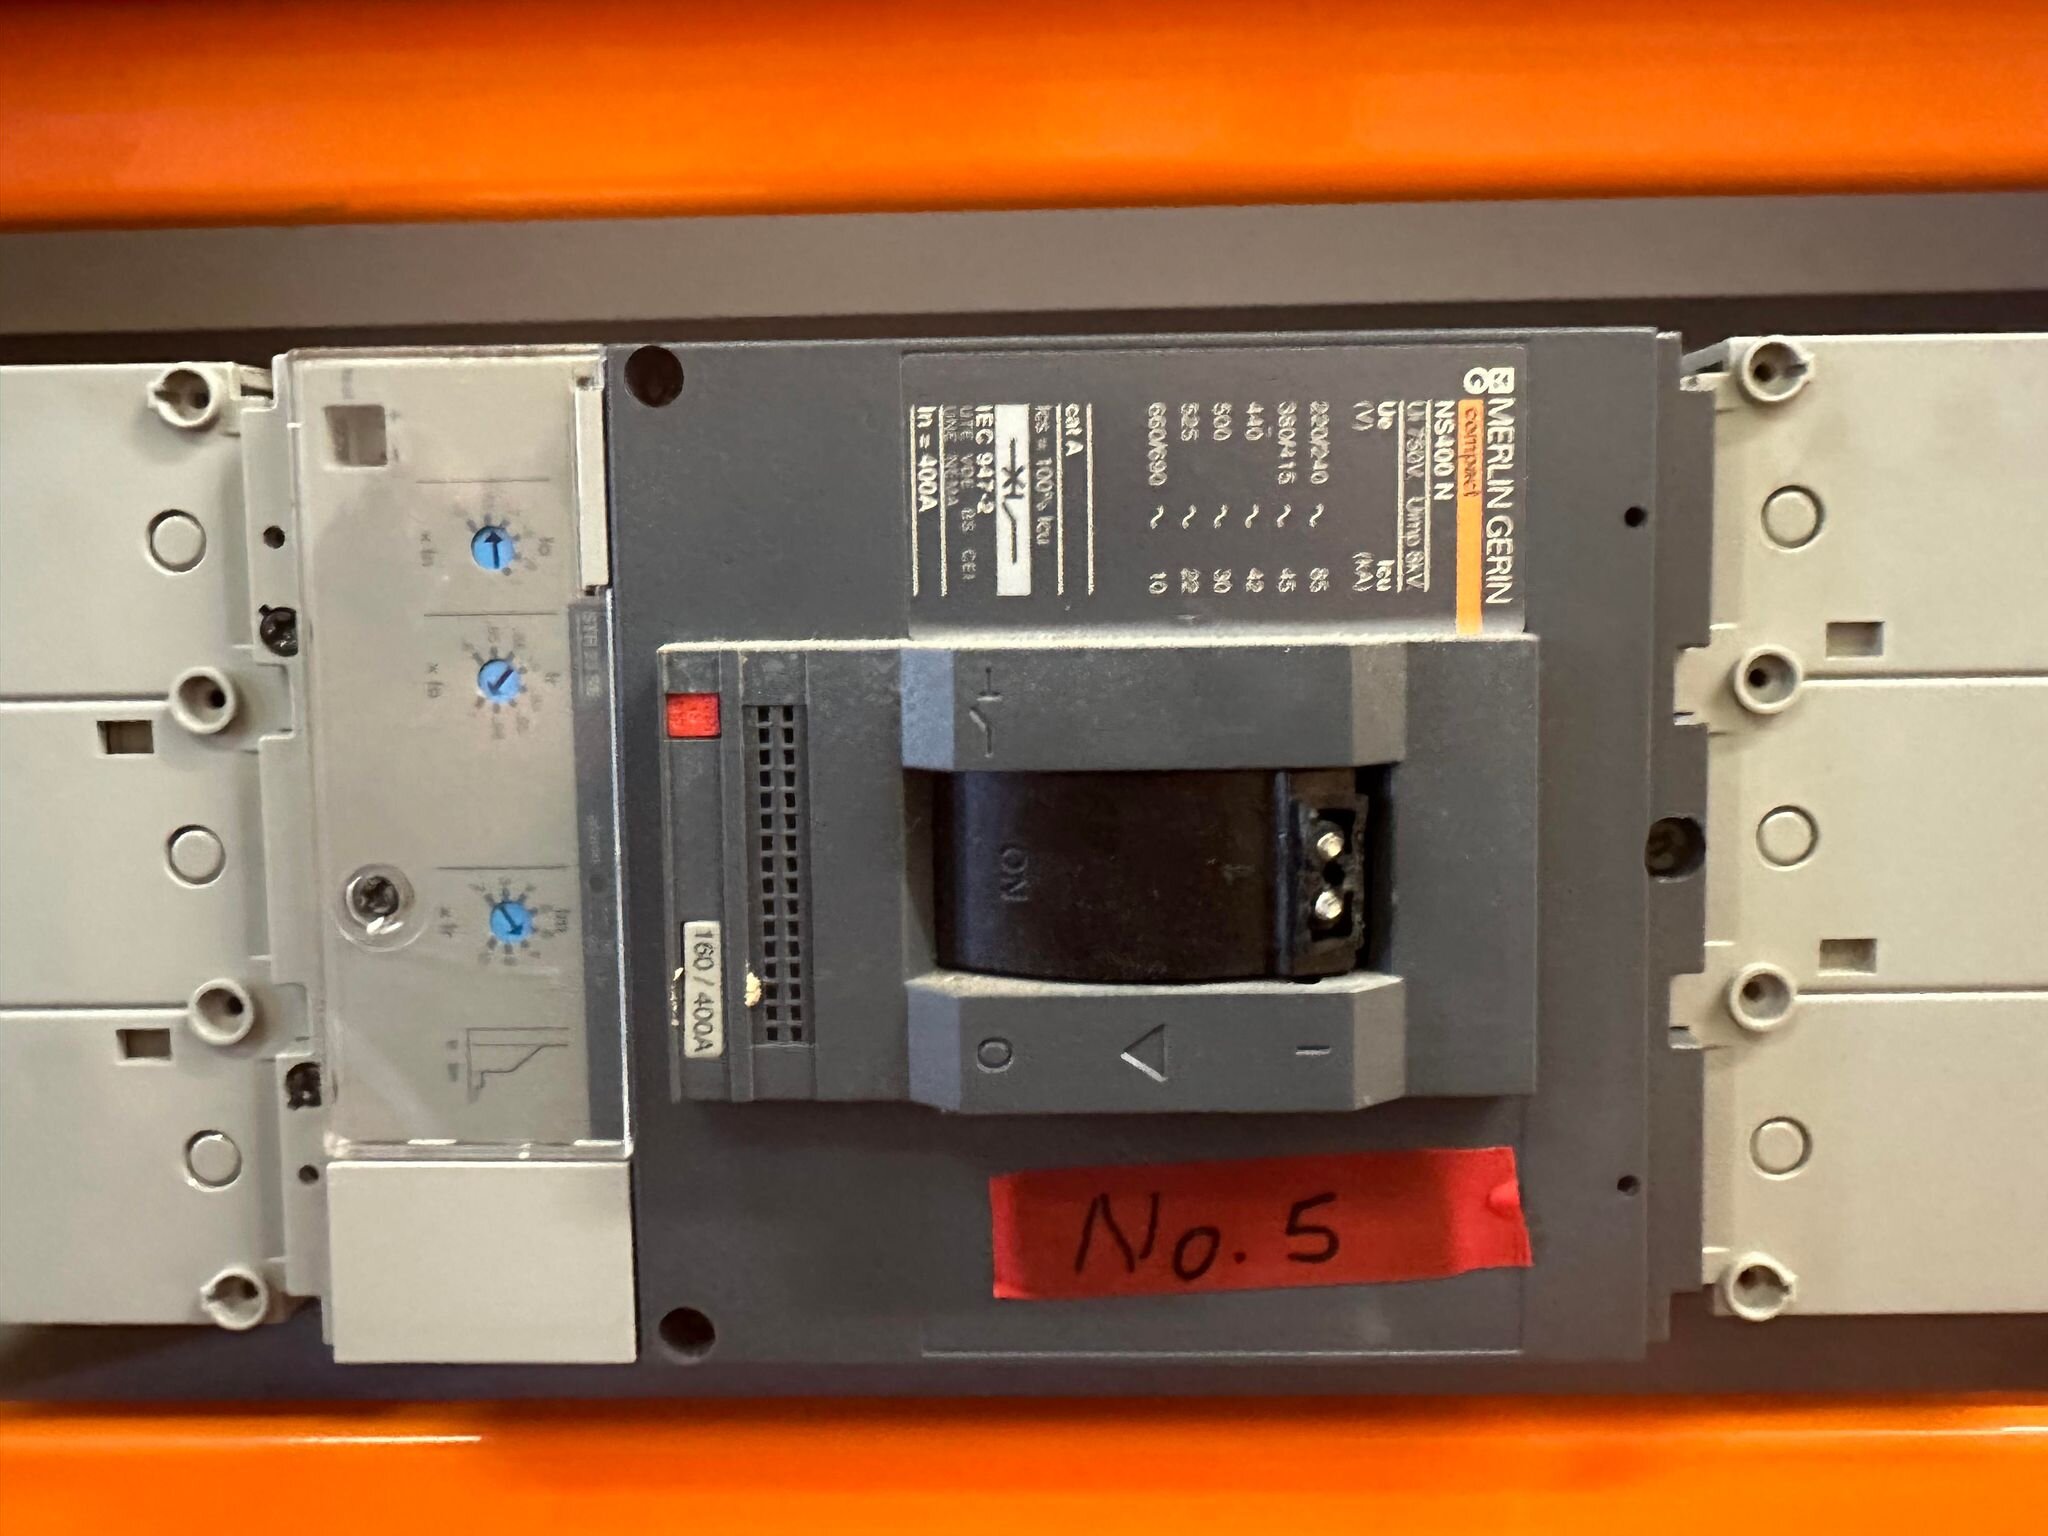 It is essential to do preventative maintenance on switchboards to prevent any issues that may have risen. Eg: see pictures of broken circuit breaker mechanisms that cannot be isolated in the case of emergencies or other scheduled electrical maintenen